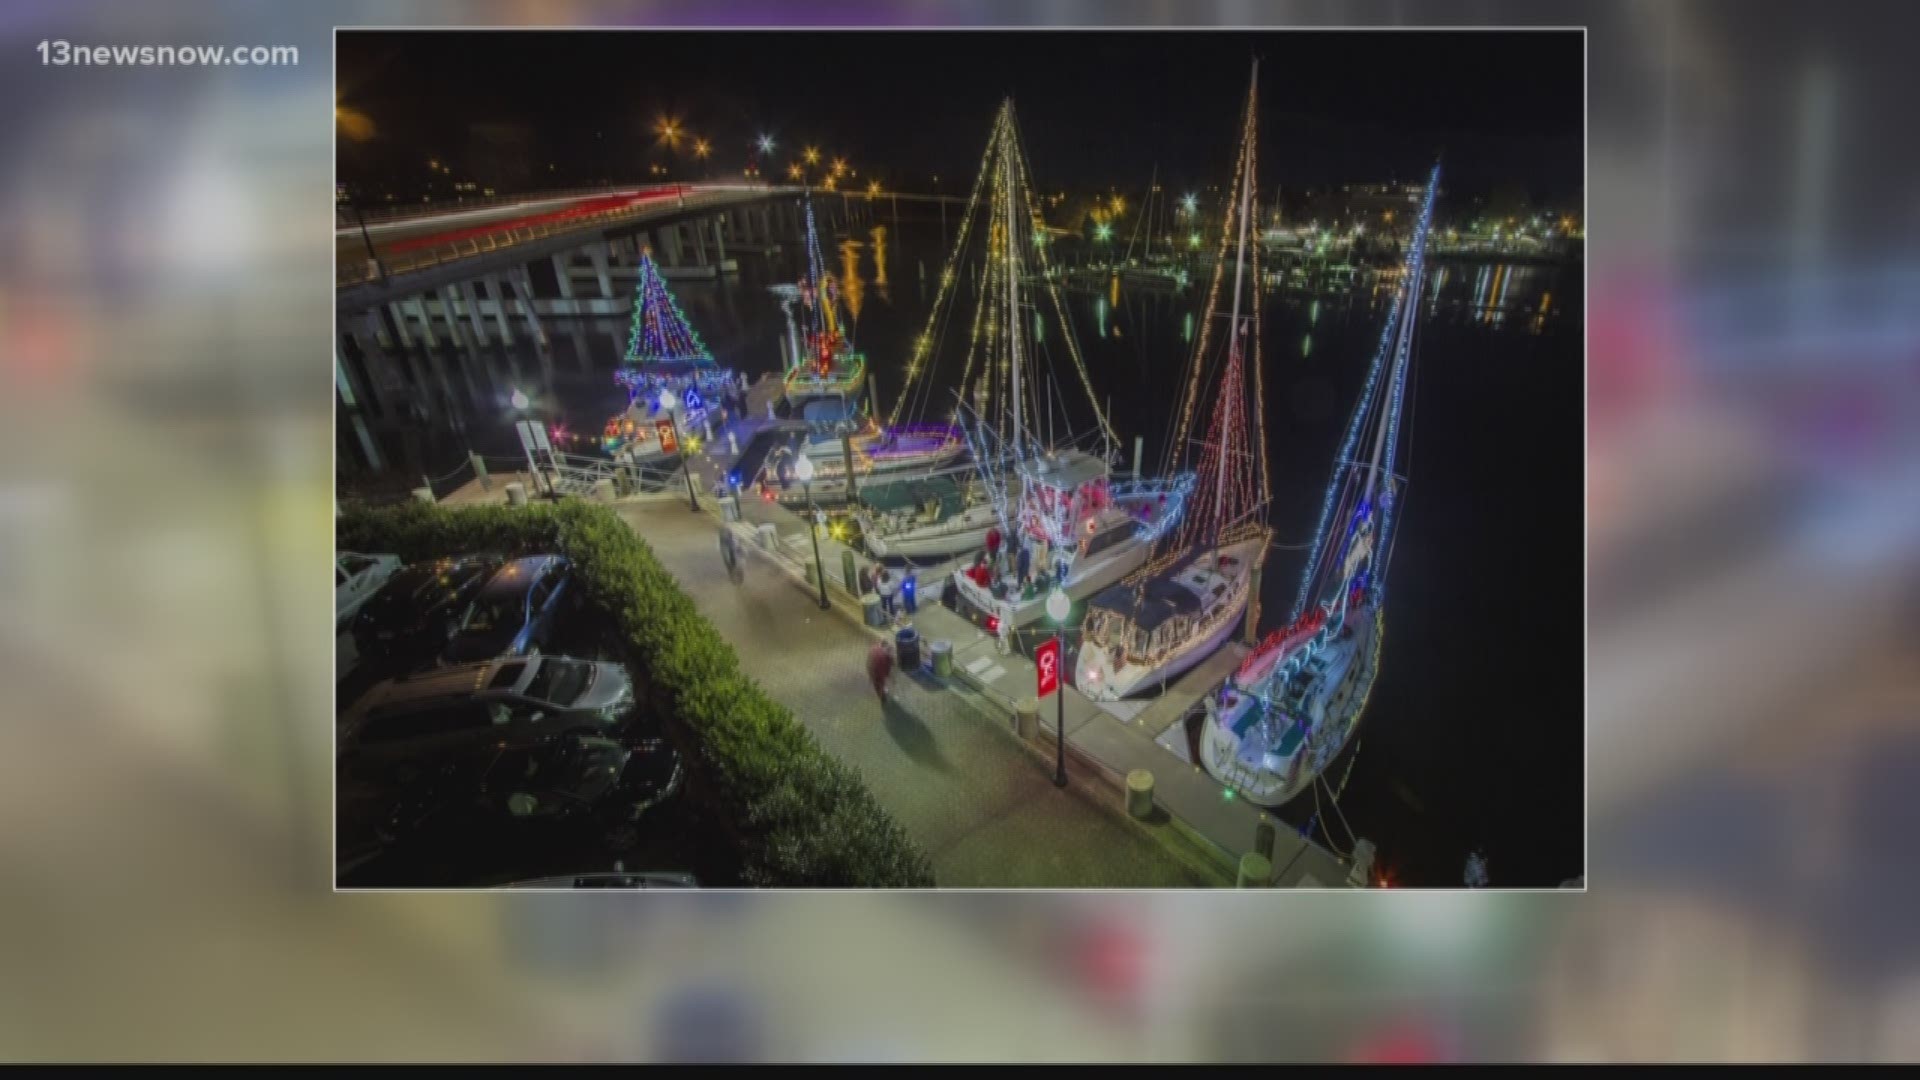 The 30th annual Downtown Hampton Lighted Boat Parade returns Friday, Dec. 7.